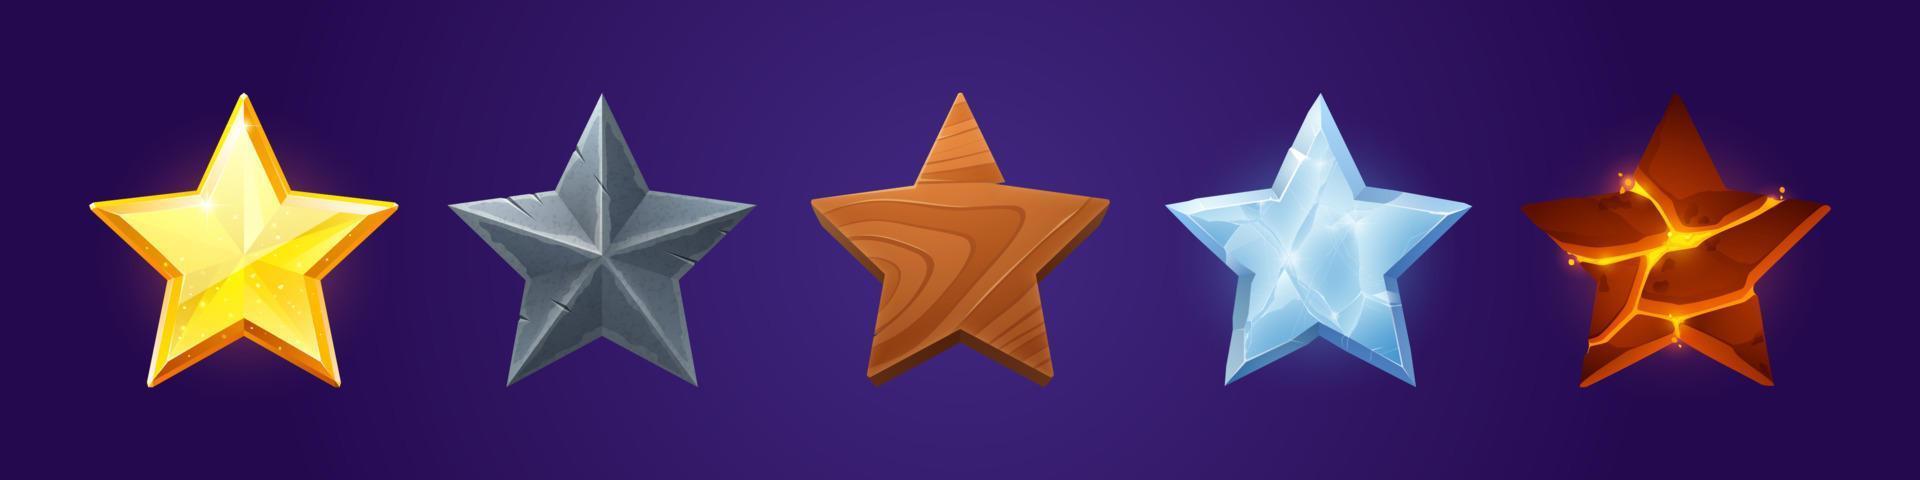 Stars game score elements, Ui or gui rate assets vector